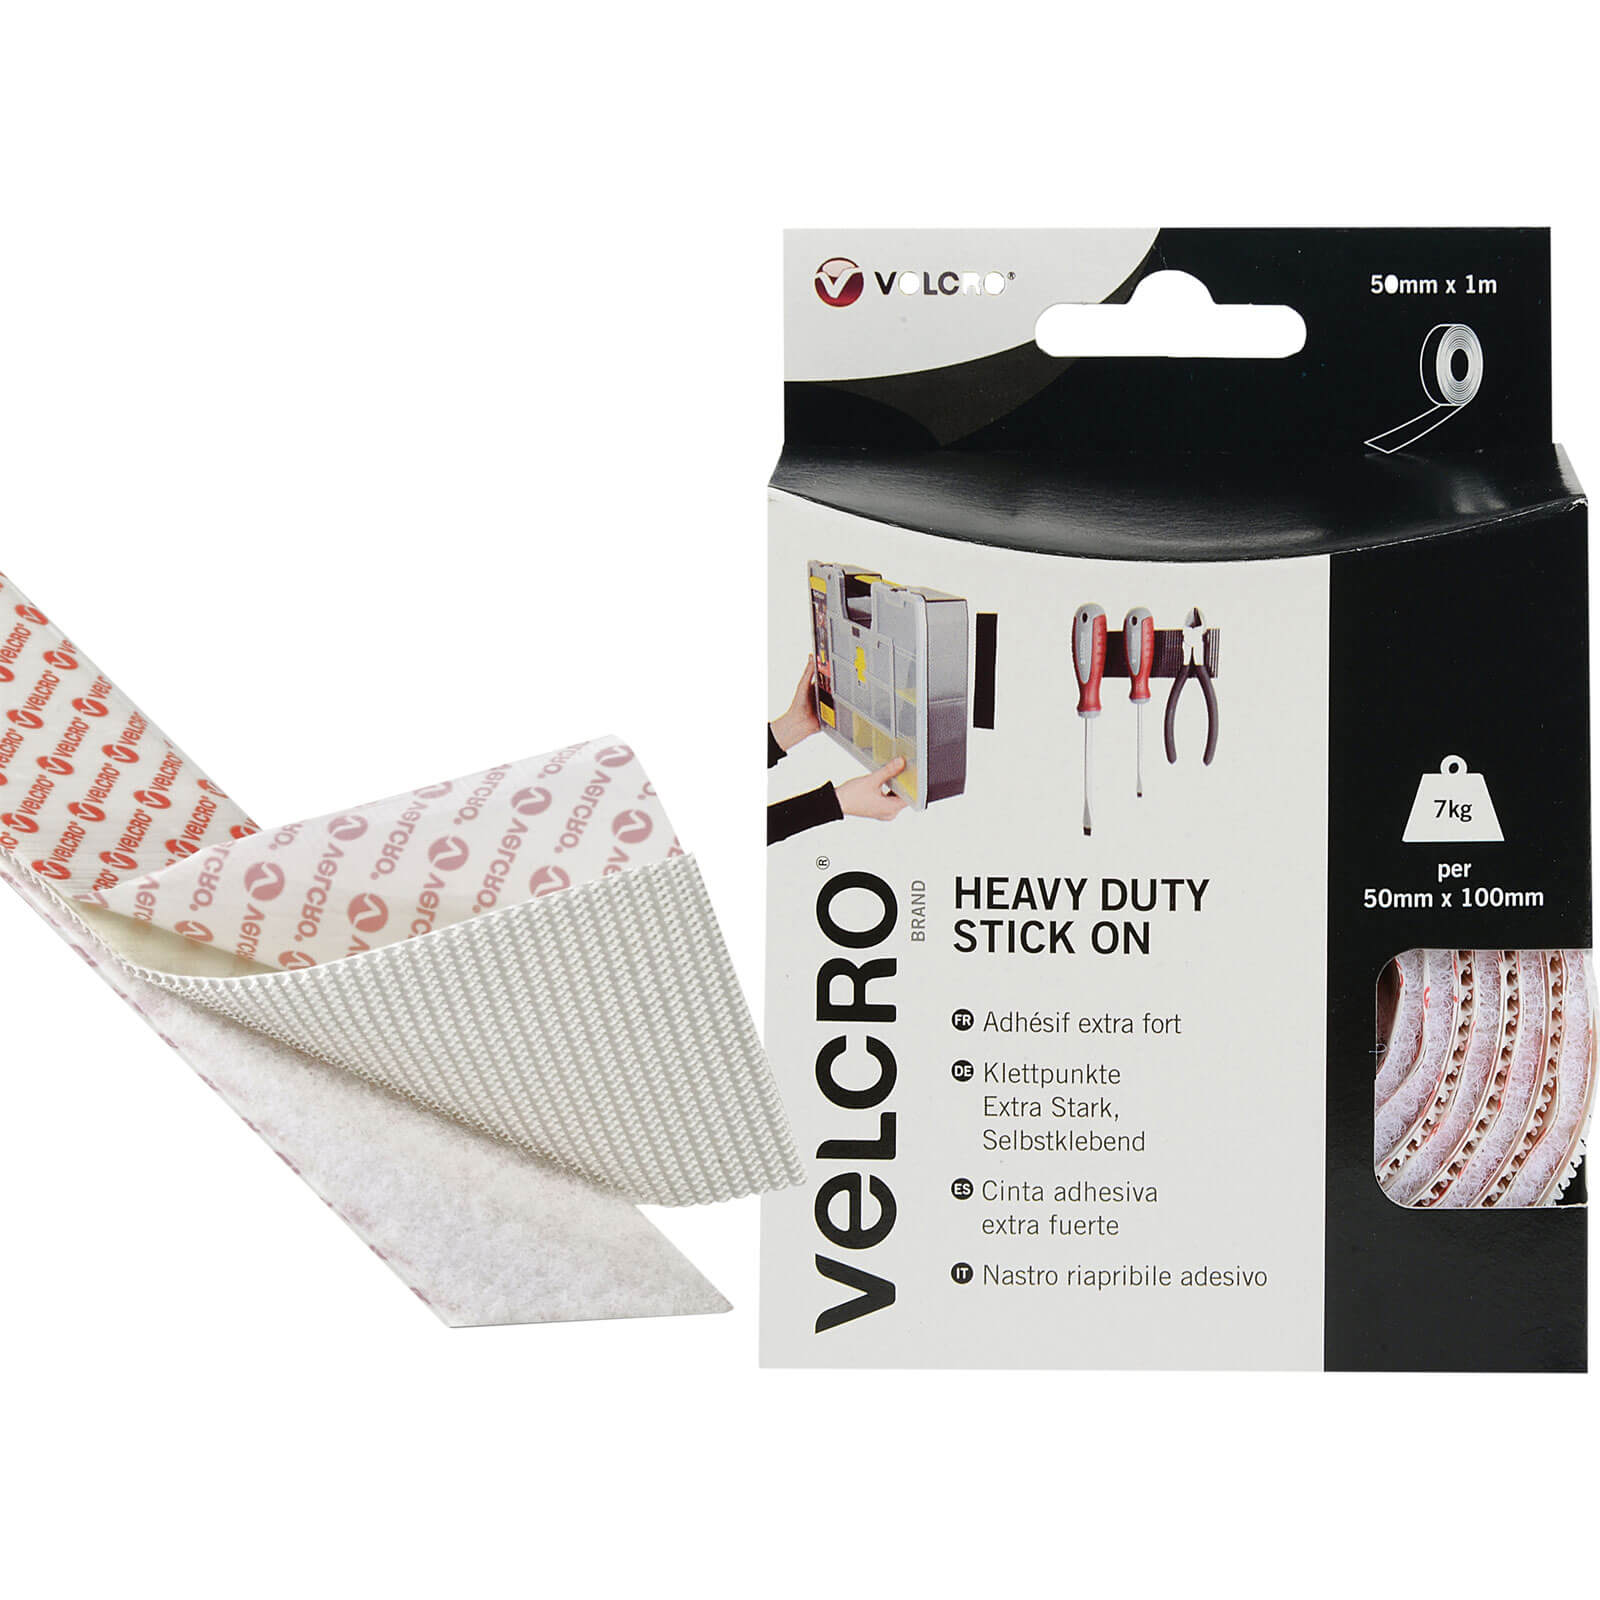 Image of Velcro Heavy Duty Stick On Tape White 50mm 1m Pack of 1